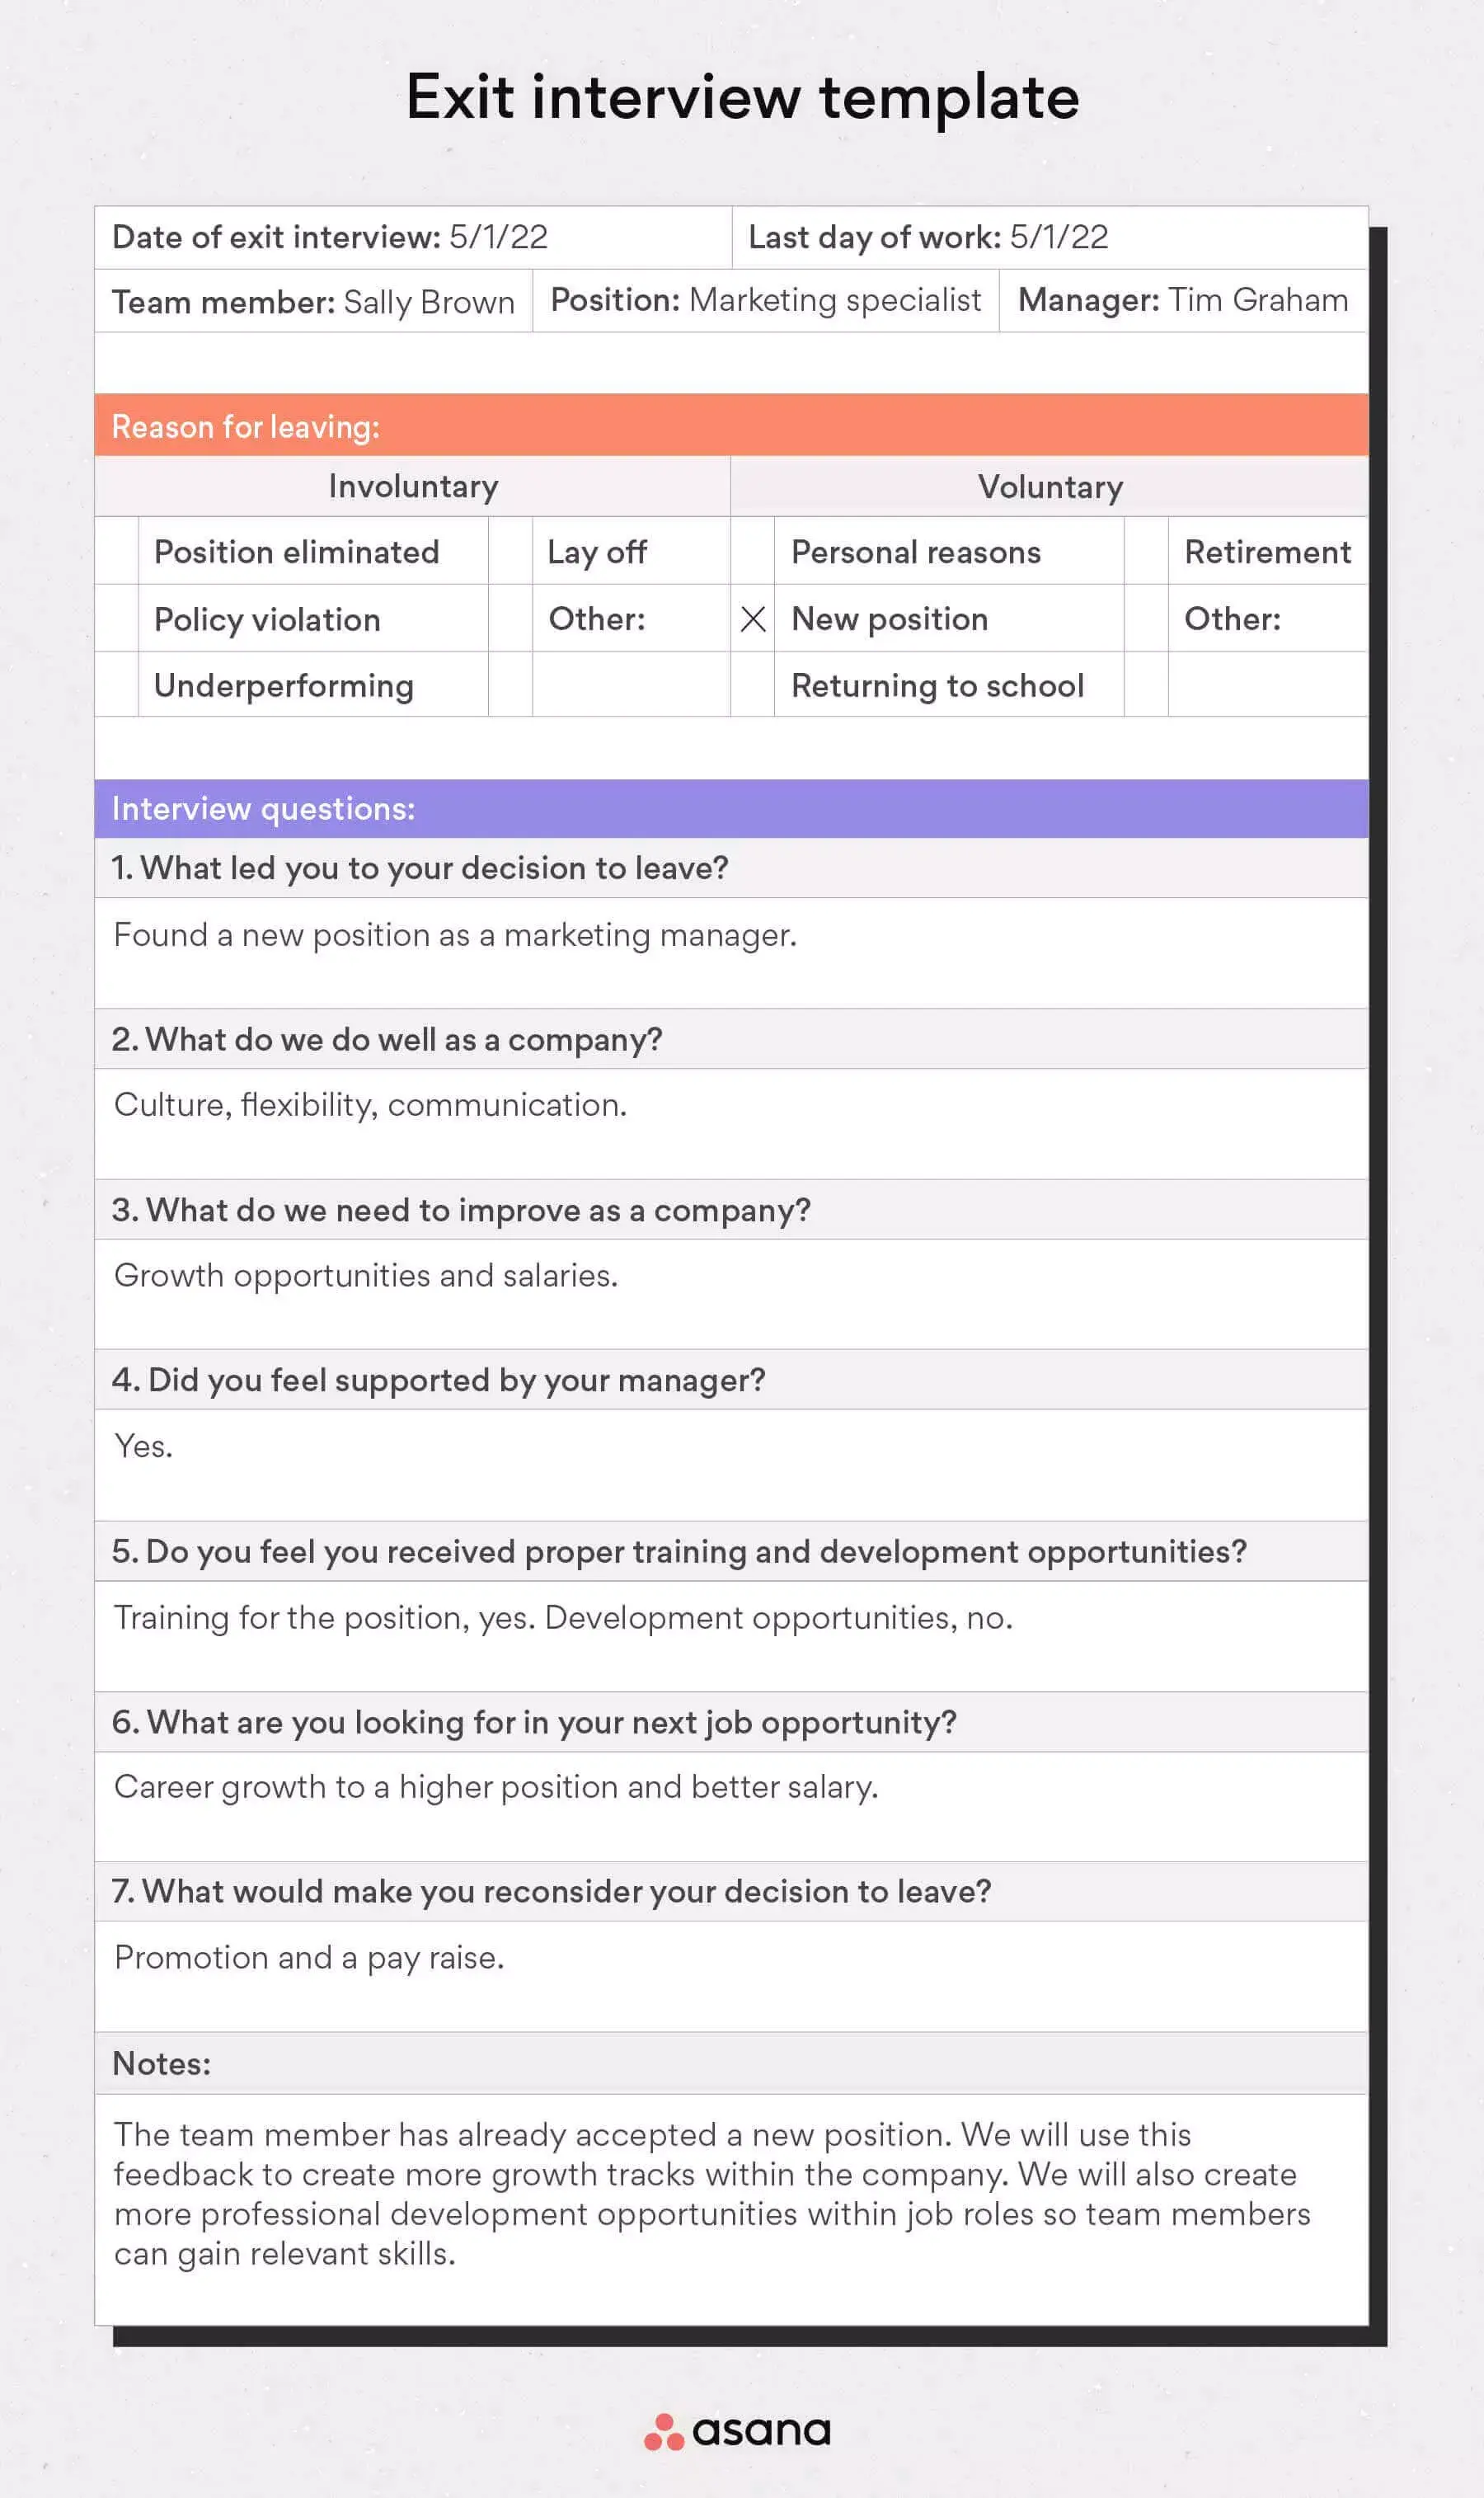 [inline illustration] Exit interview template (example)